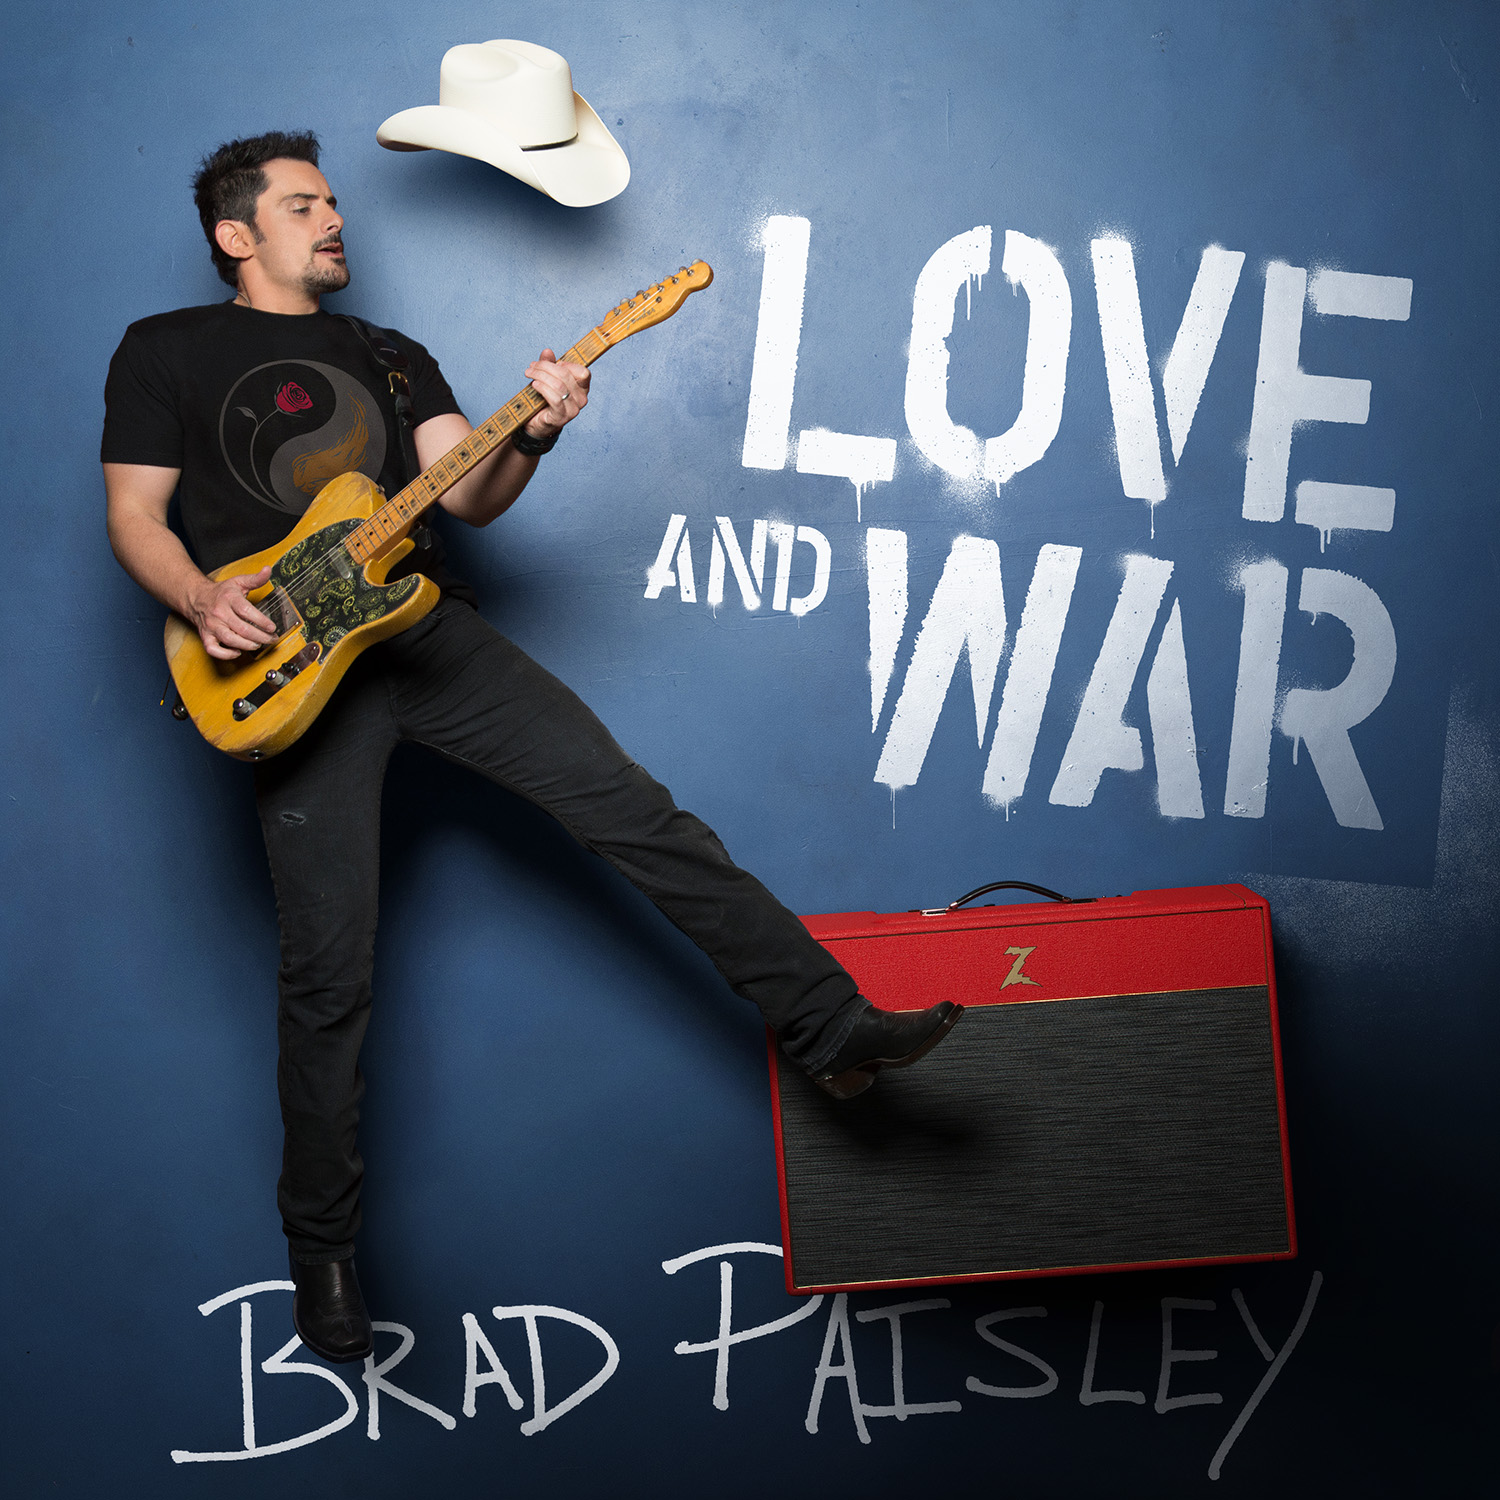 Brad Paisley's "Love And War" Cover [Sony Music]